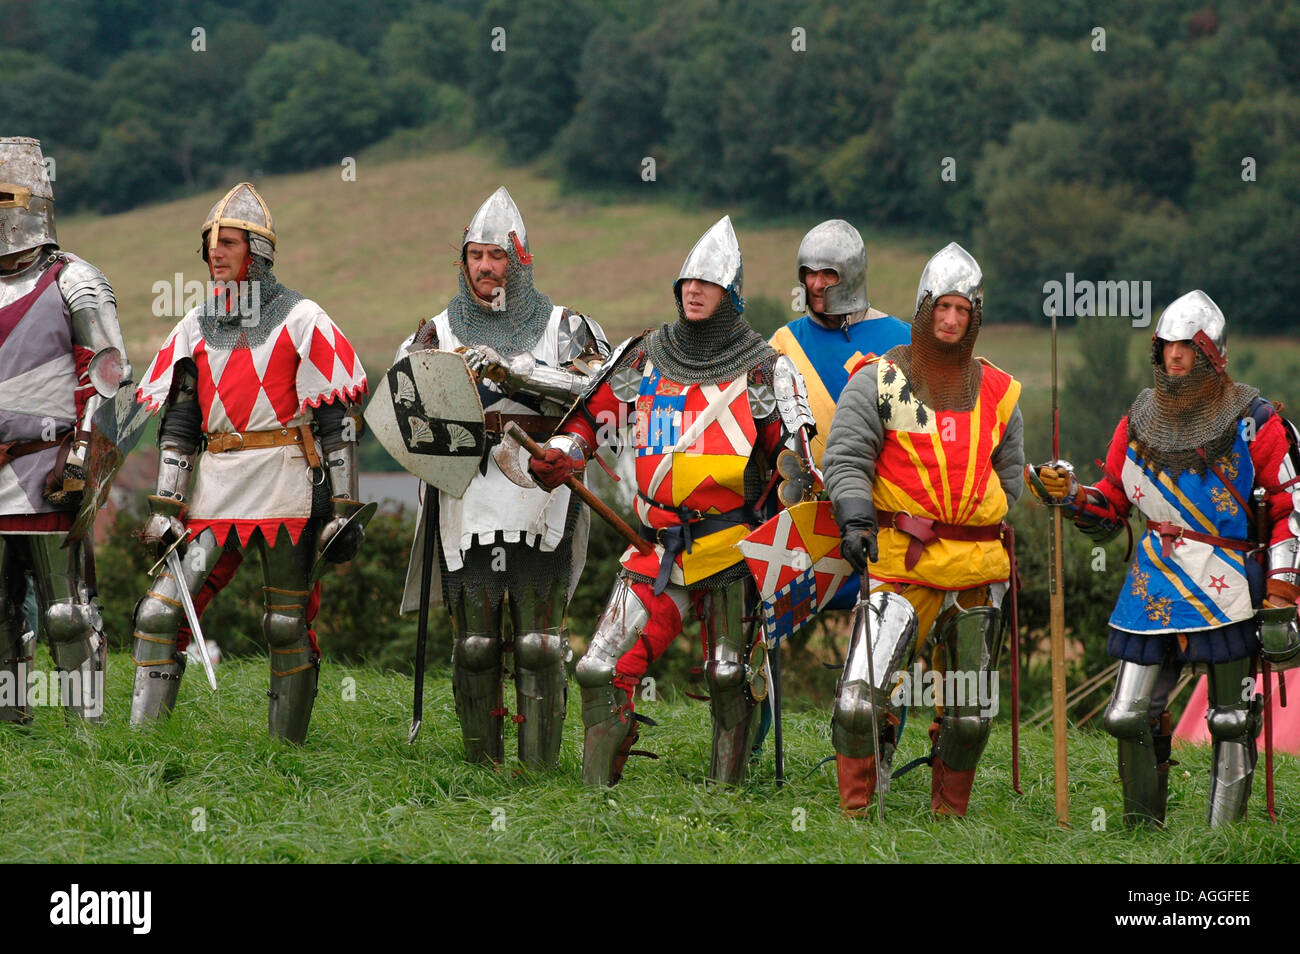 Knights prepare for battle, The Plantagenet Medieval Society recreate life in the 14th century in a display at Goodrich Castle Stock Photo